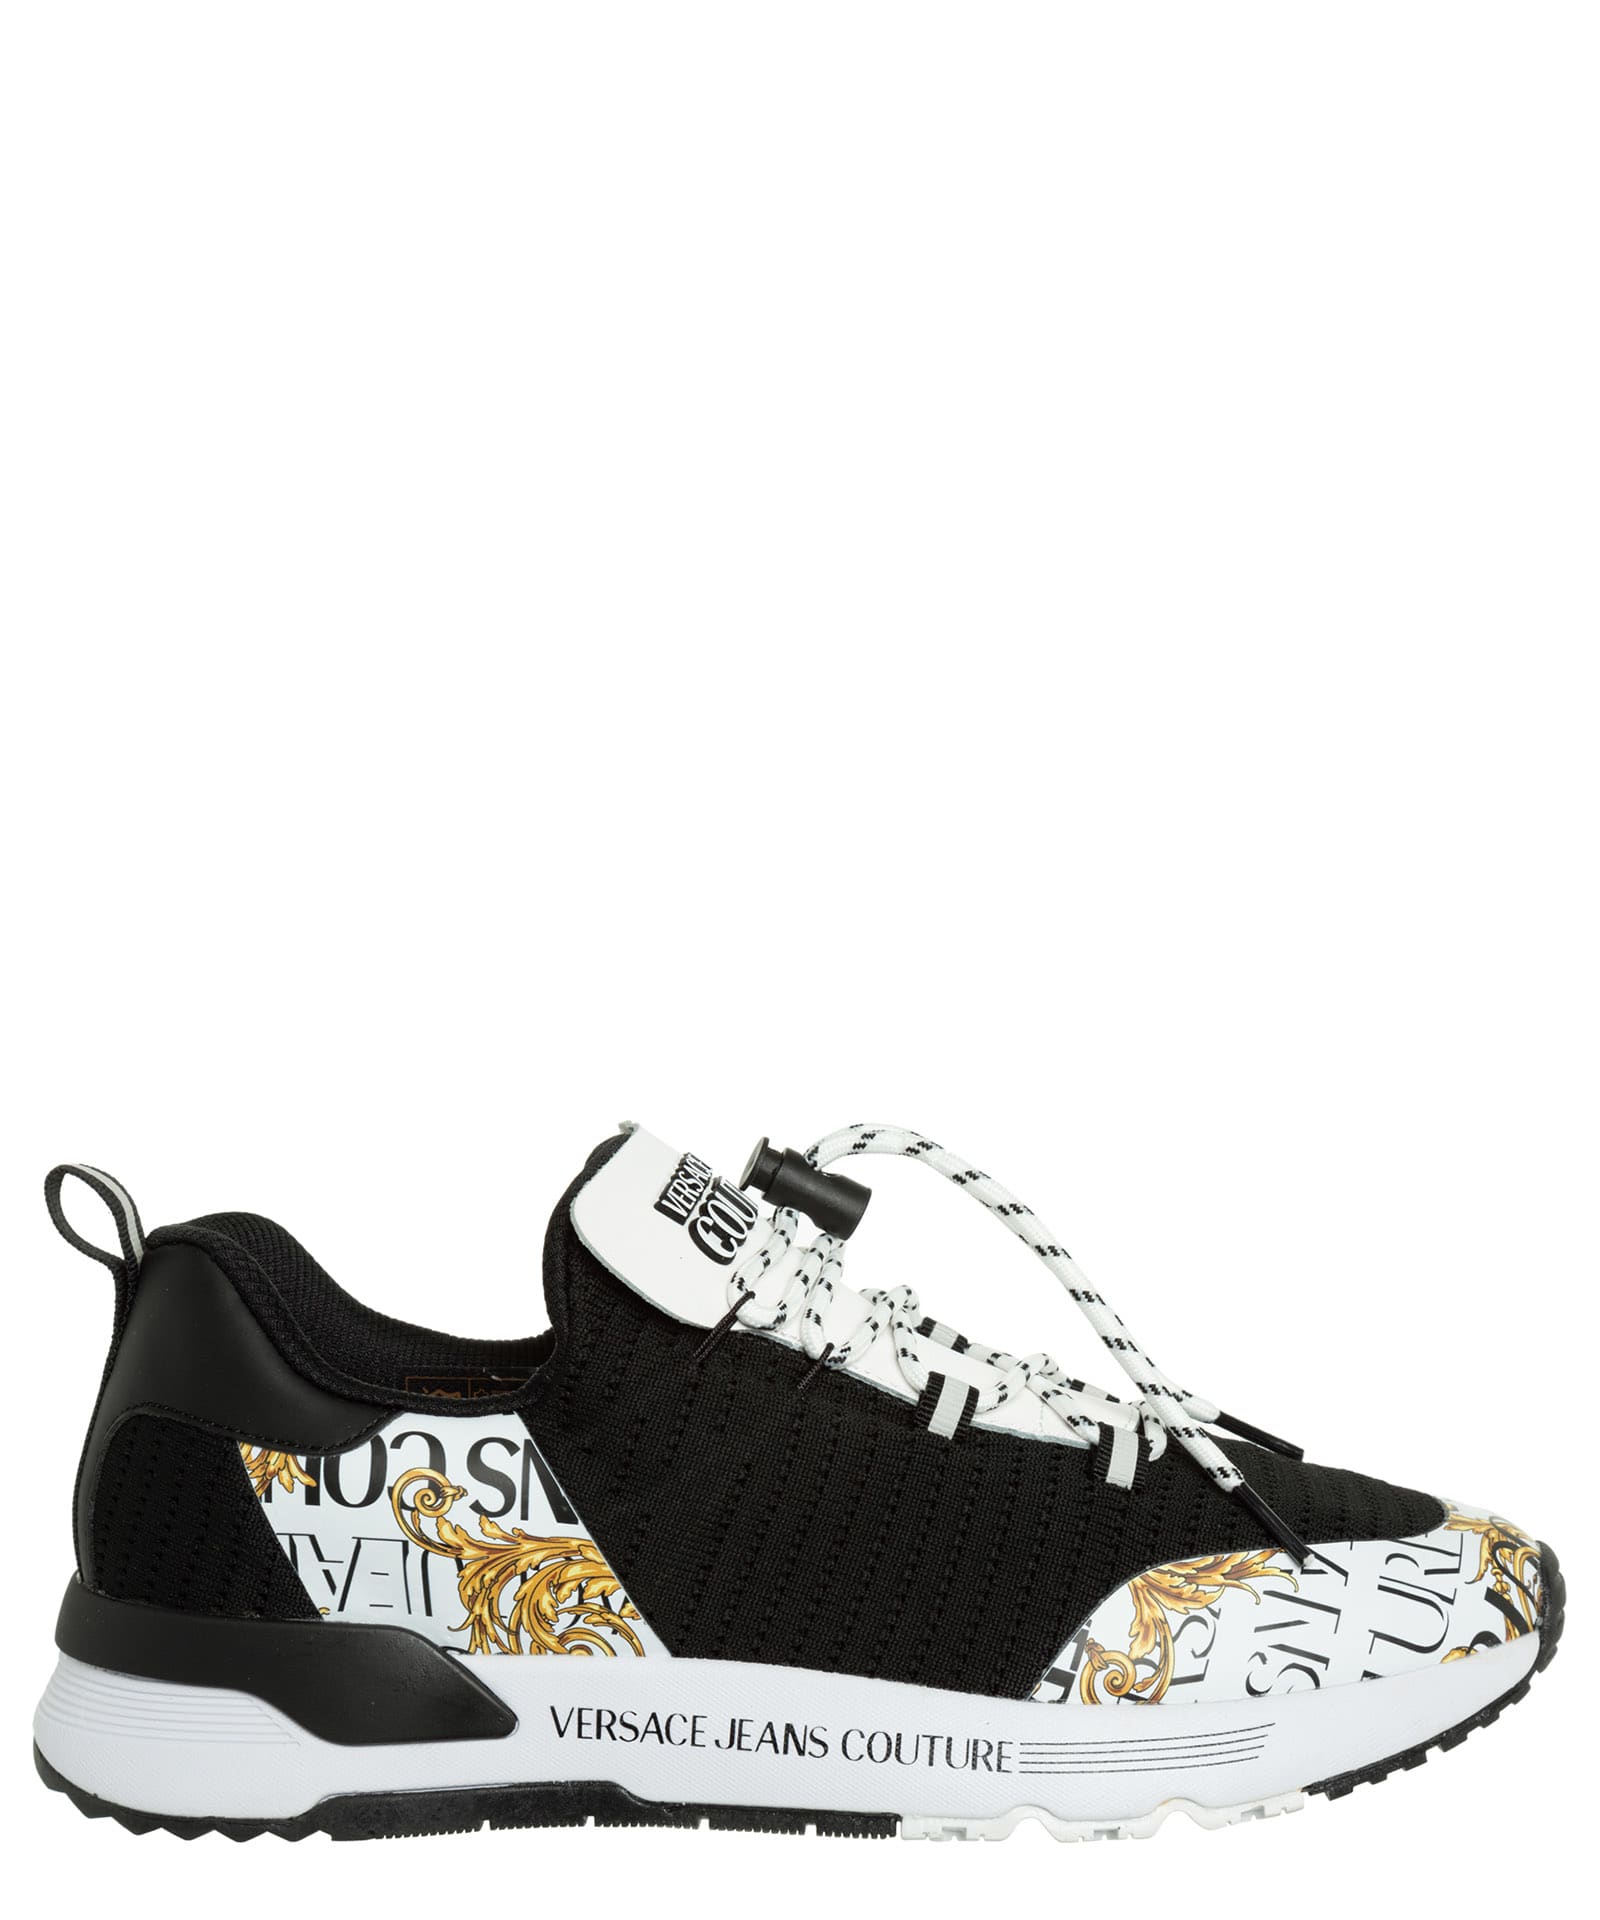 VERSACE JEANS COUTURE DYNAMIC LOGO COUTURE LEATHER SNEAKERS